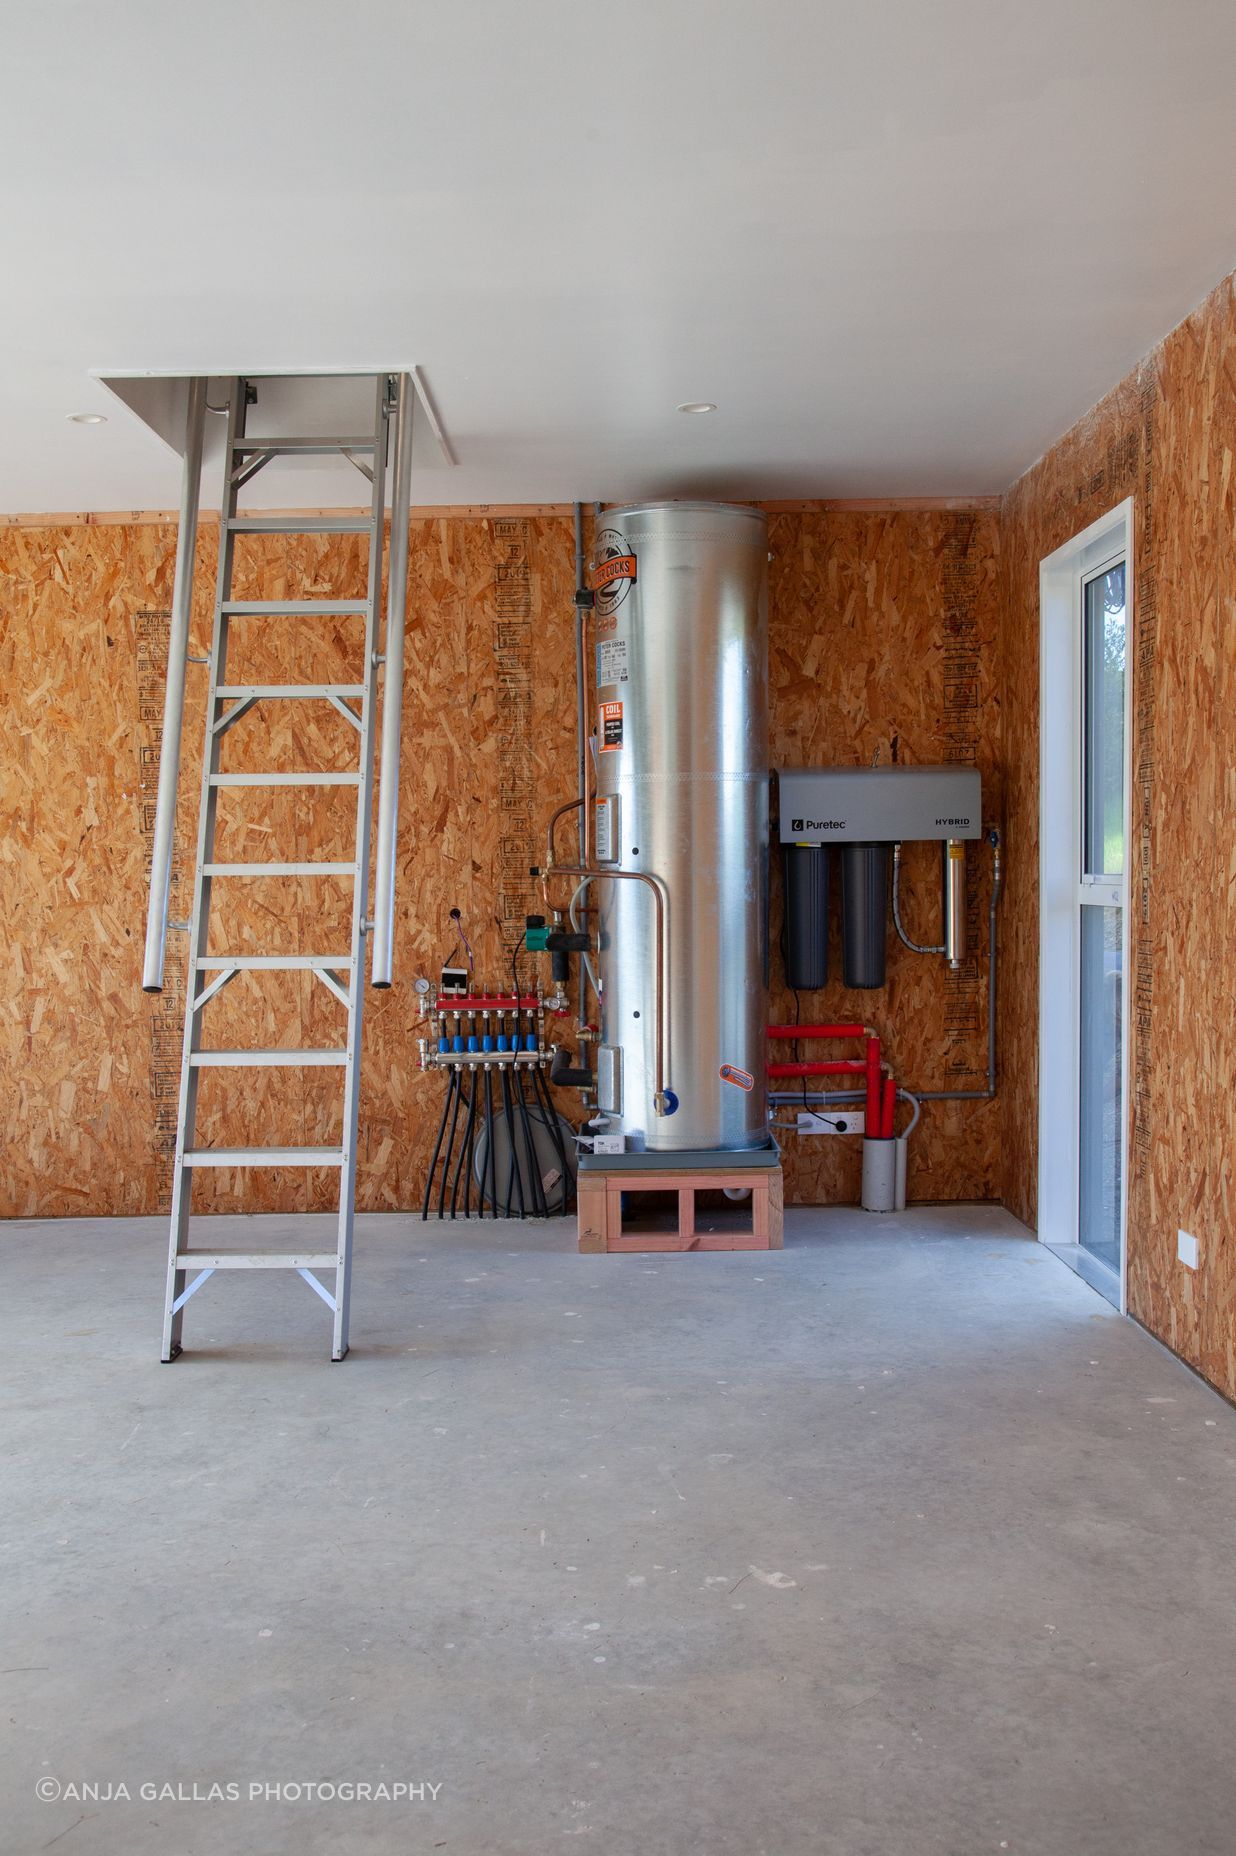 Underfloor heating and water filtration